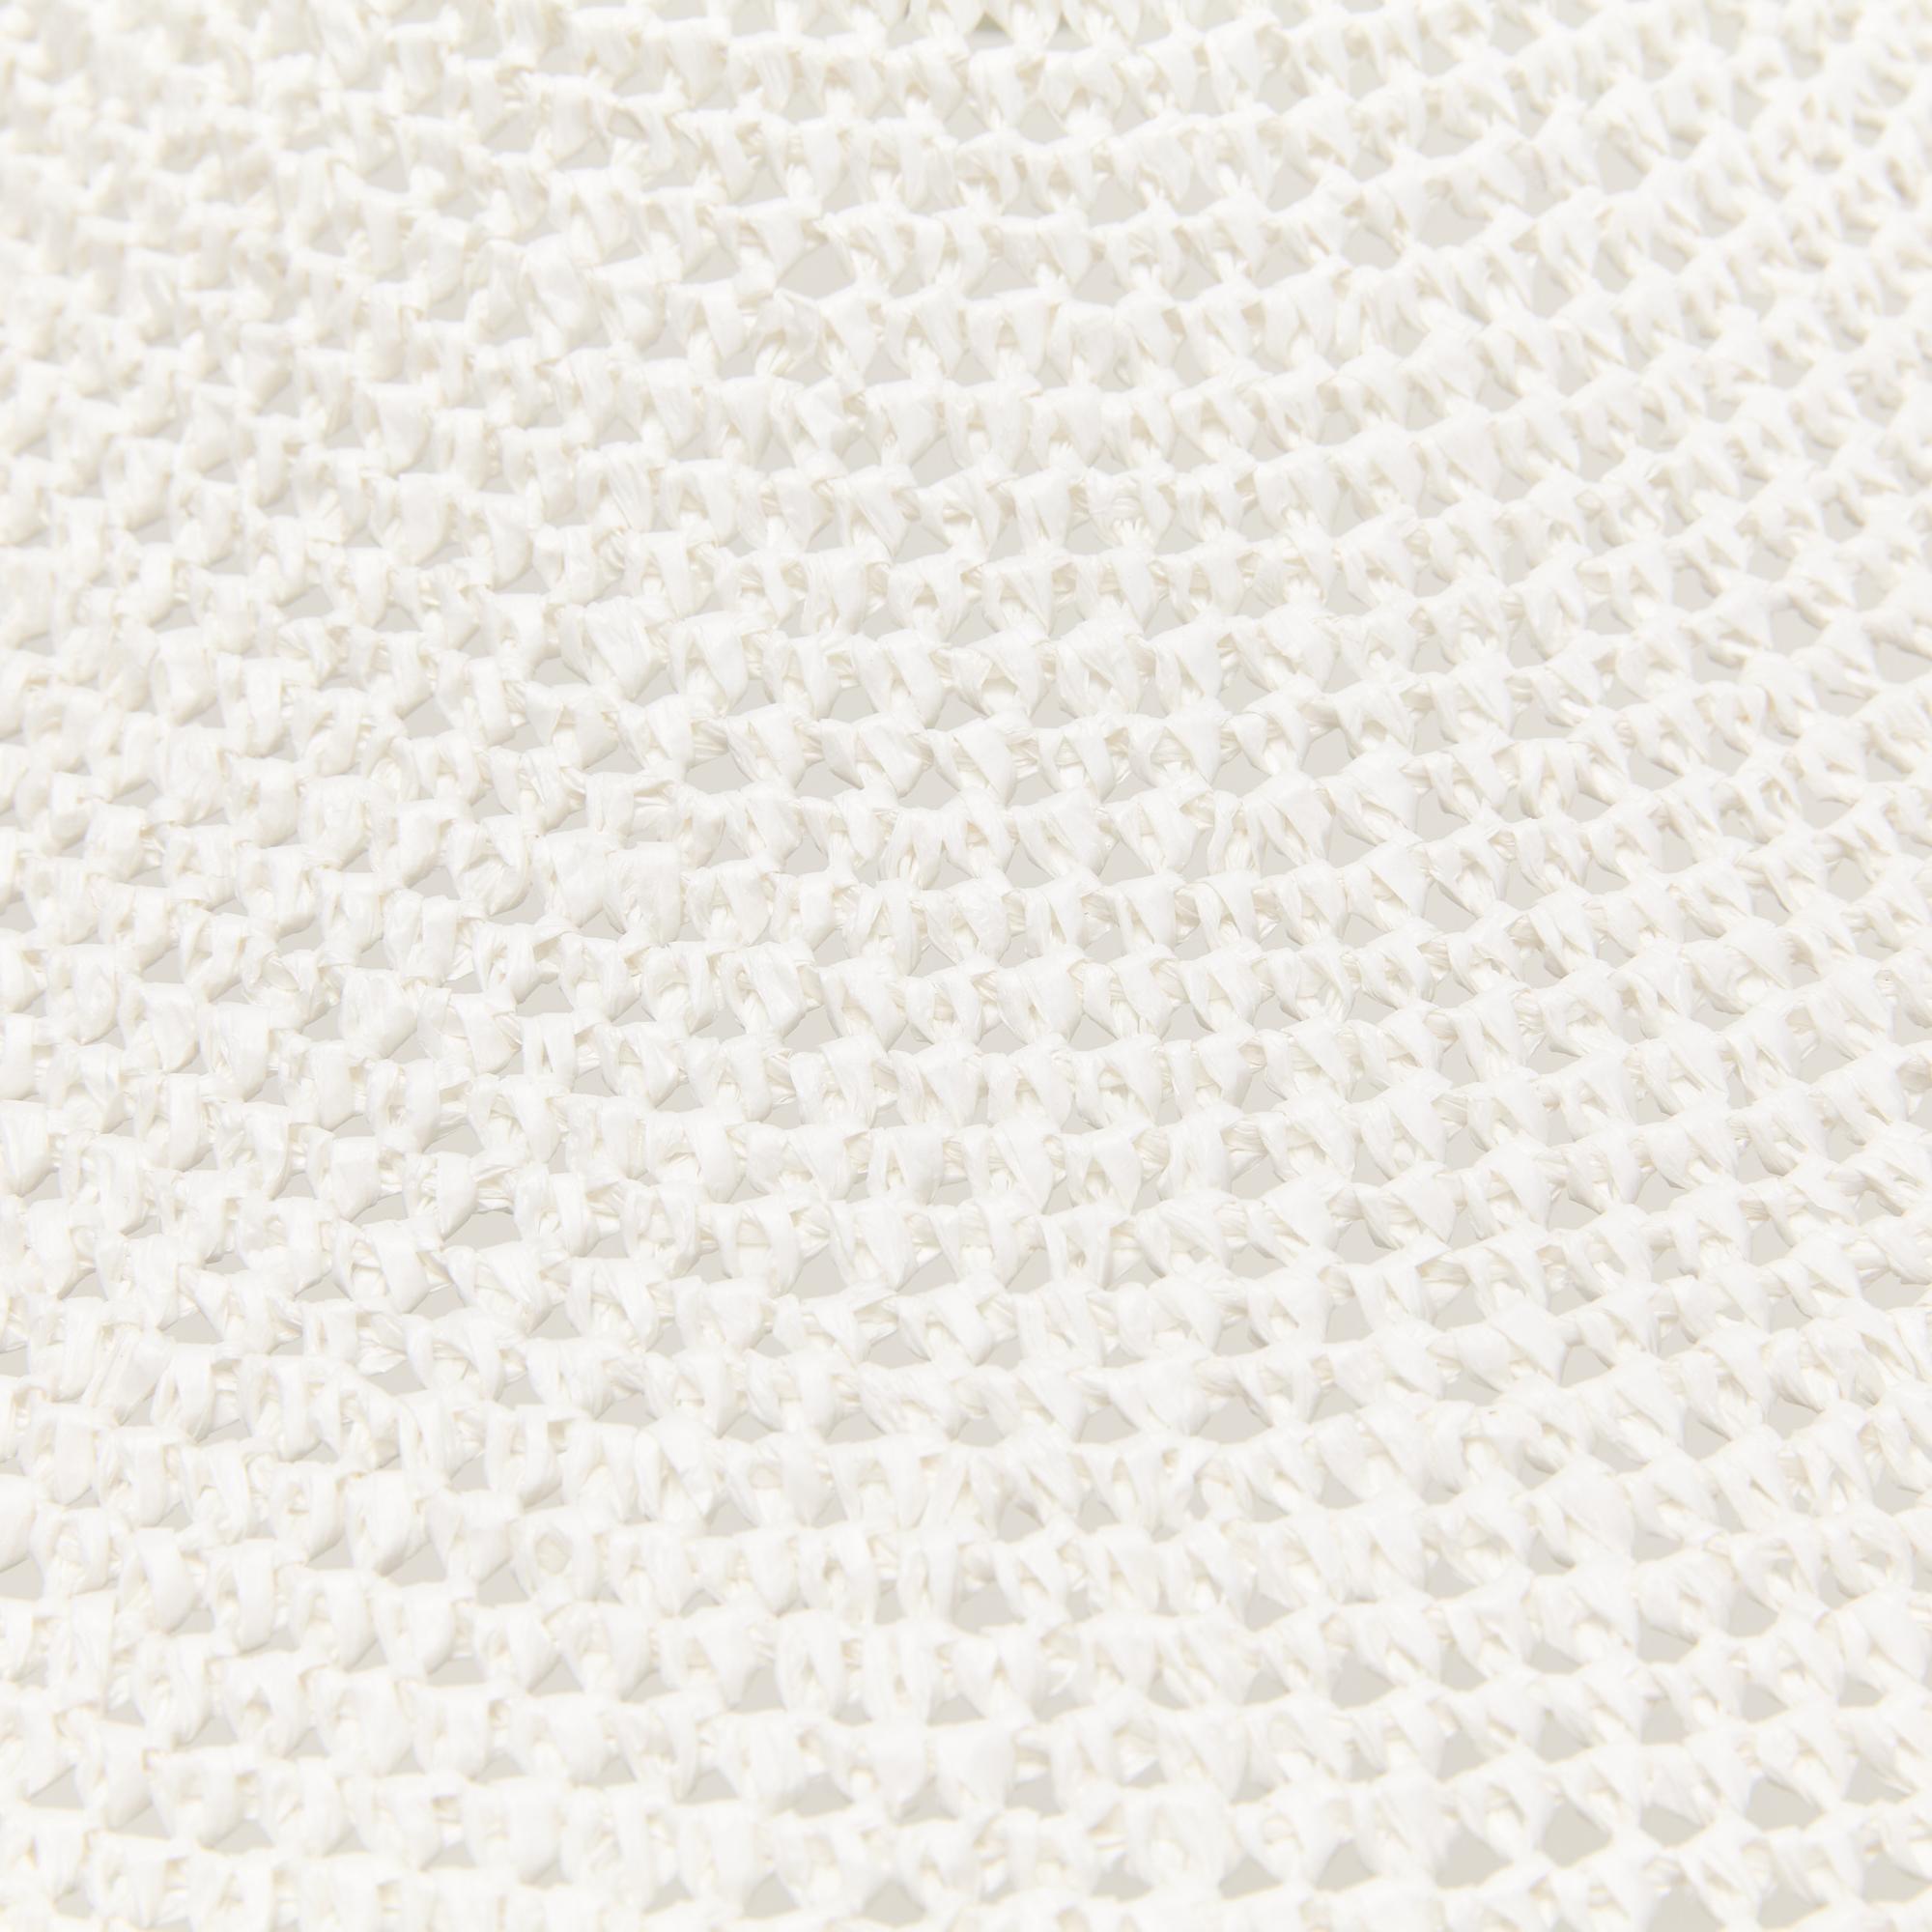 British SOLITAIRE 02 Pendant Light Ø80cm/31.5in, Hand Crocheted in Egyptian Cotton For Sale